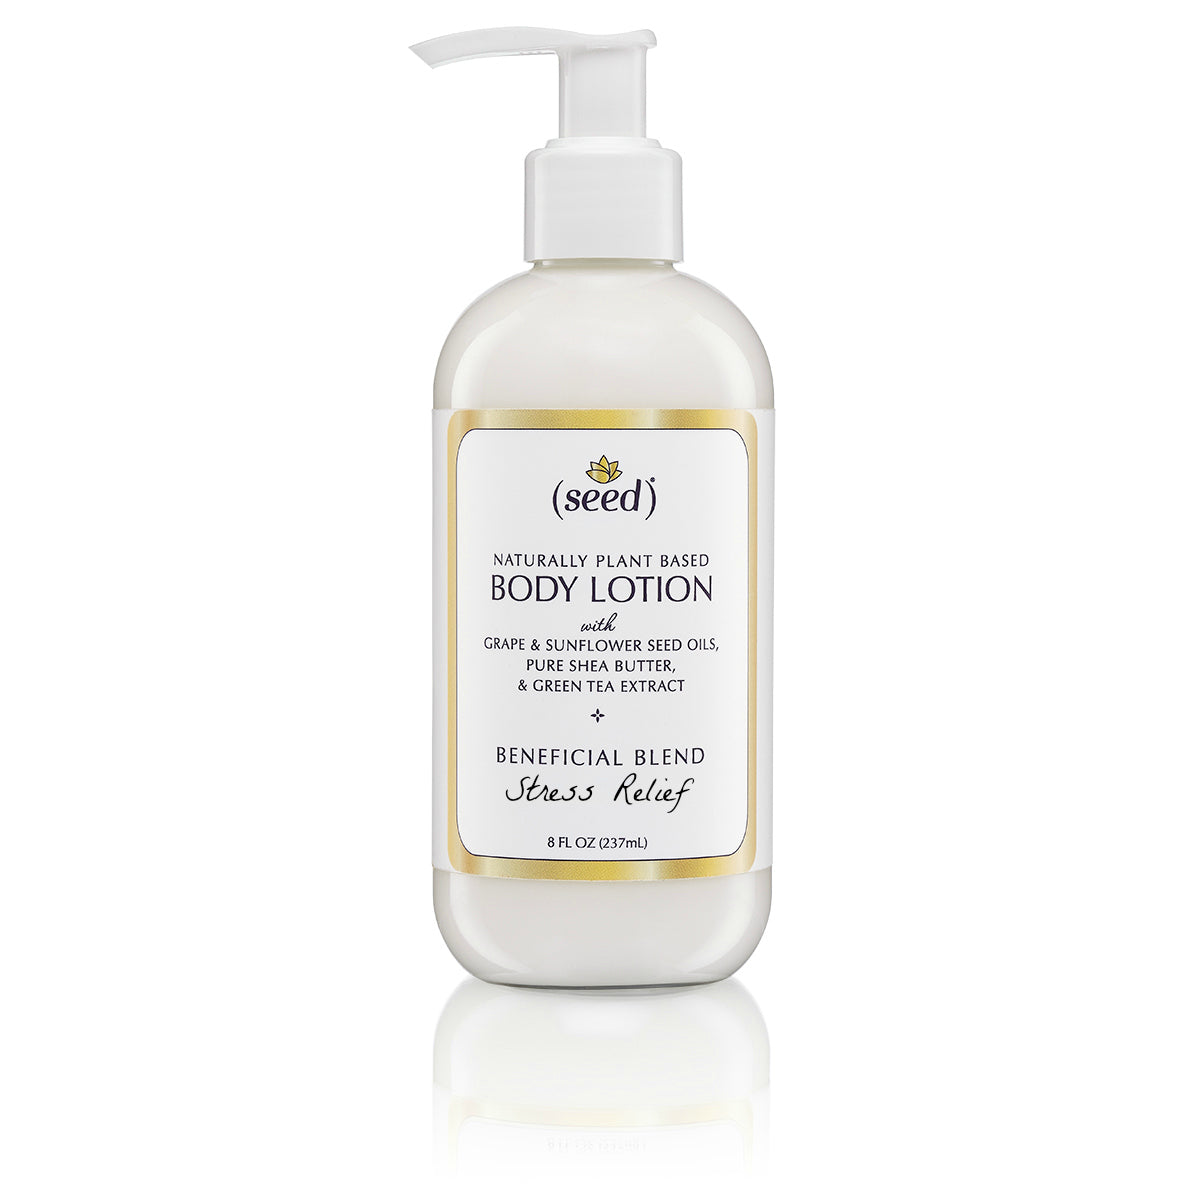 Seed Stress Relief Body Lotion features essential oils of patchouli, lavender, and clary sage